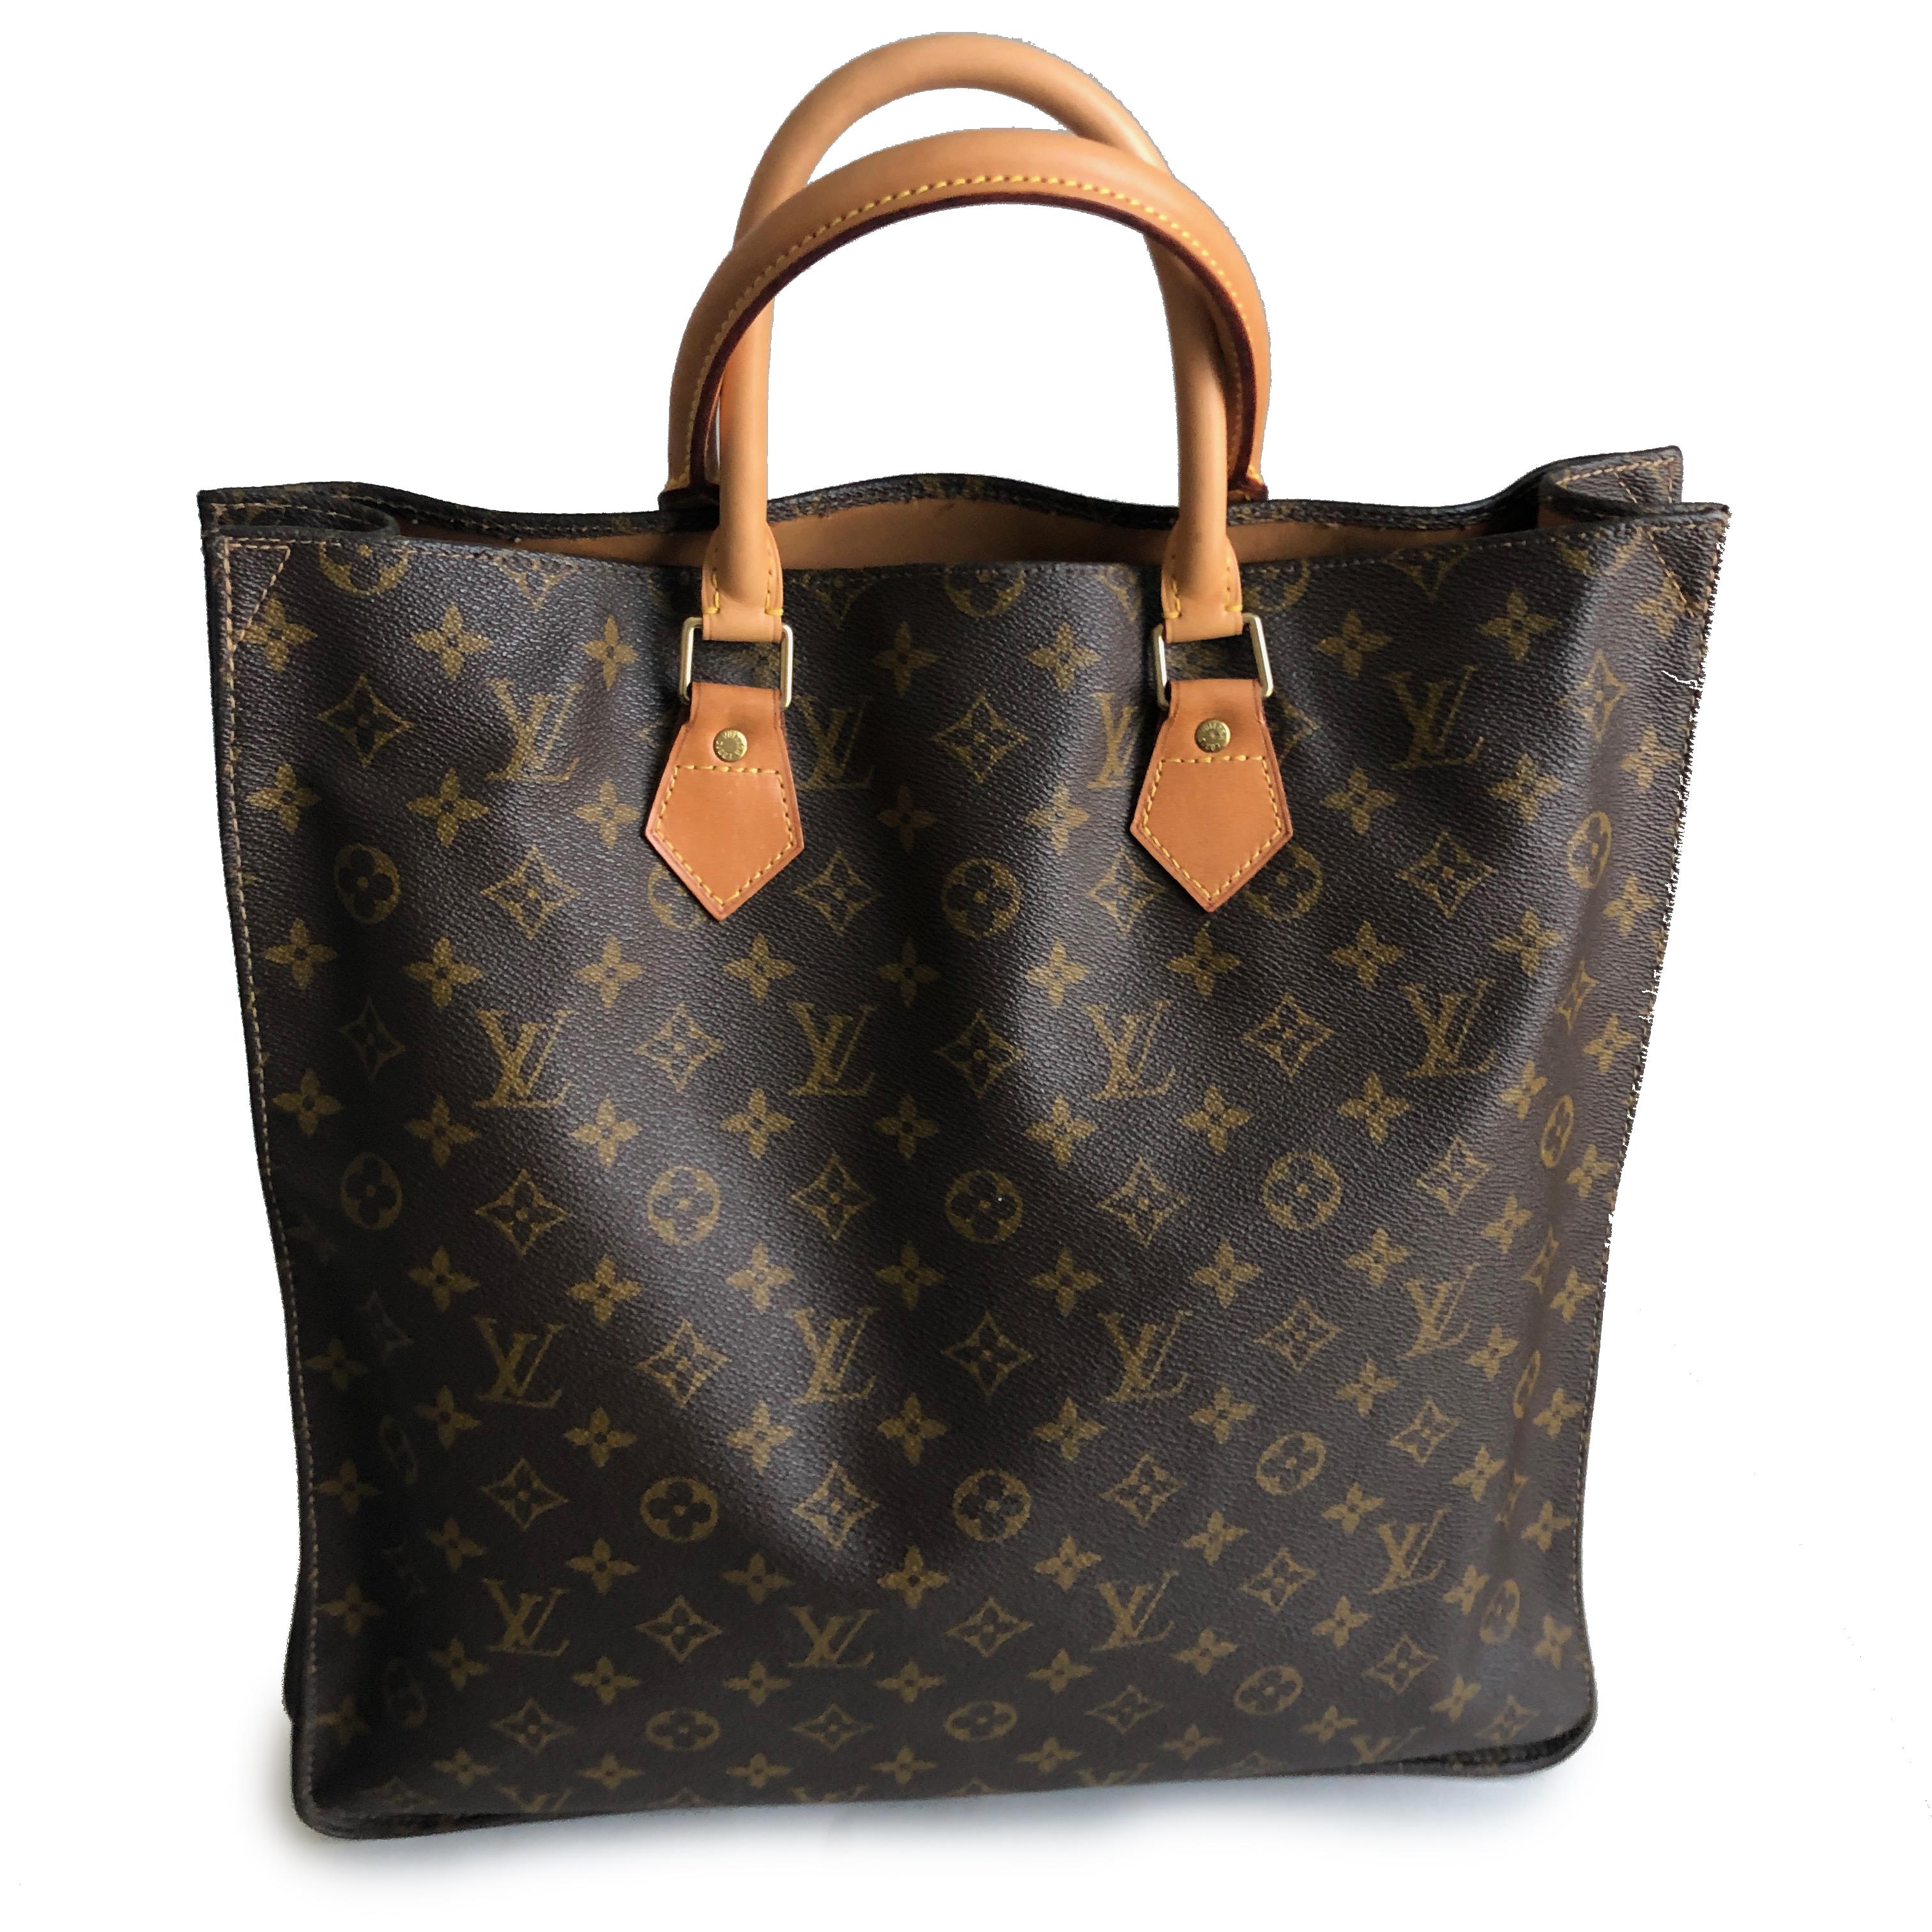 Authentic, preowned, vintage Louis Vuitton x French Company Sac Plat Tote Bag in monogram canvas w/vachetta leather handles. Fully-lined in brown fabric, with no interior pockets. 15in H x 14in L x 4in D with 5in handle drop. Preowned/vintage with